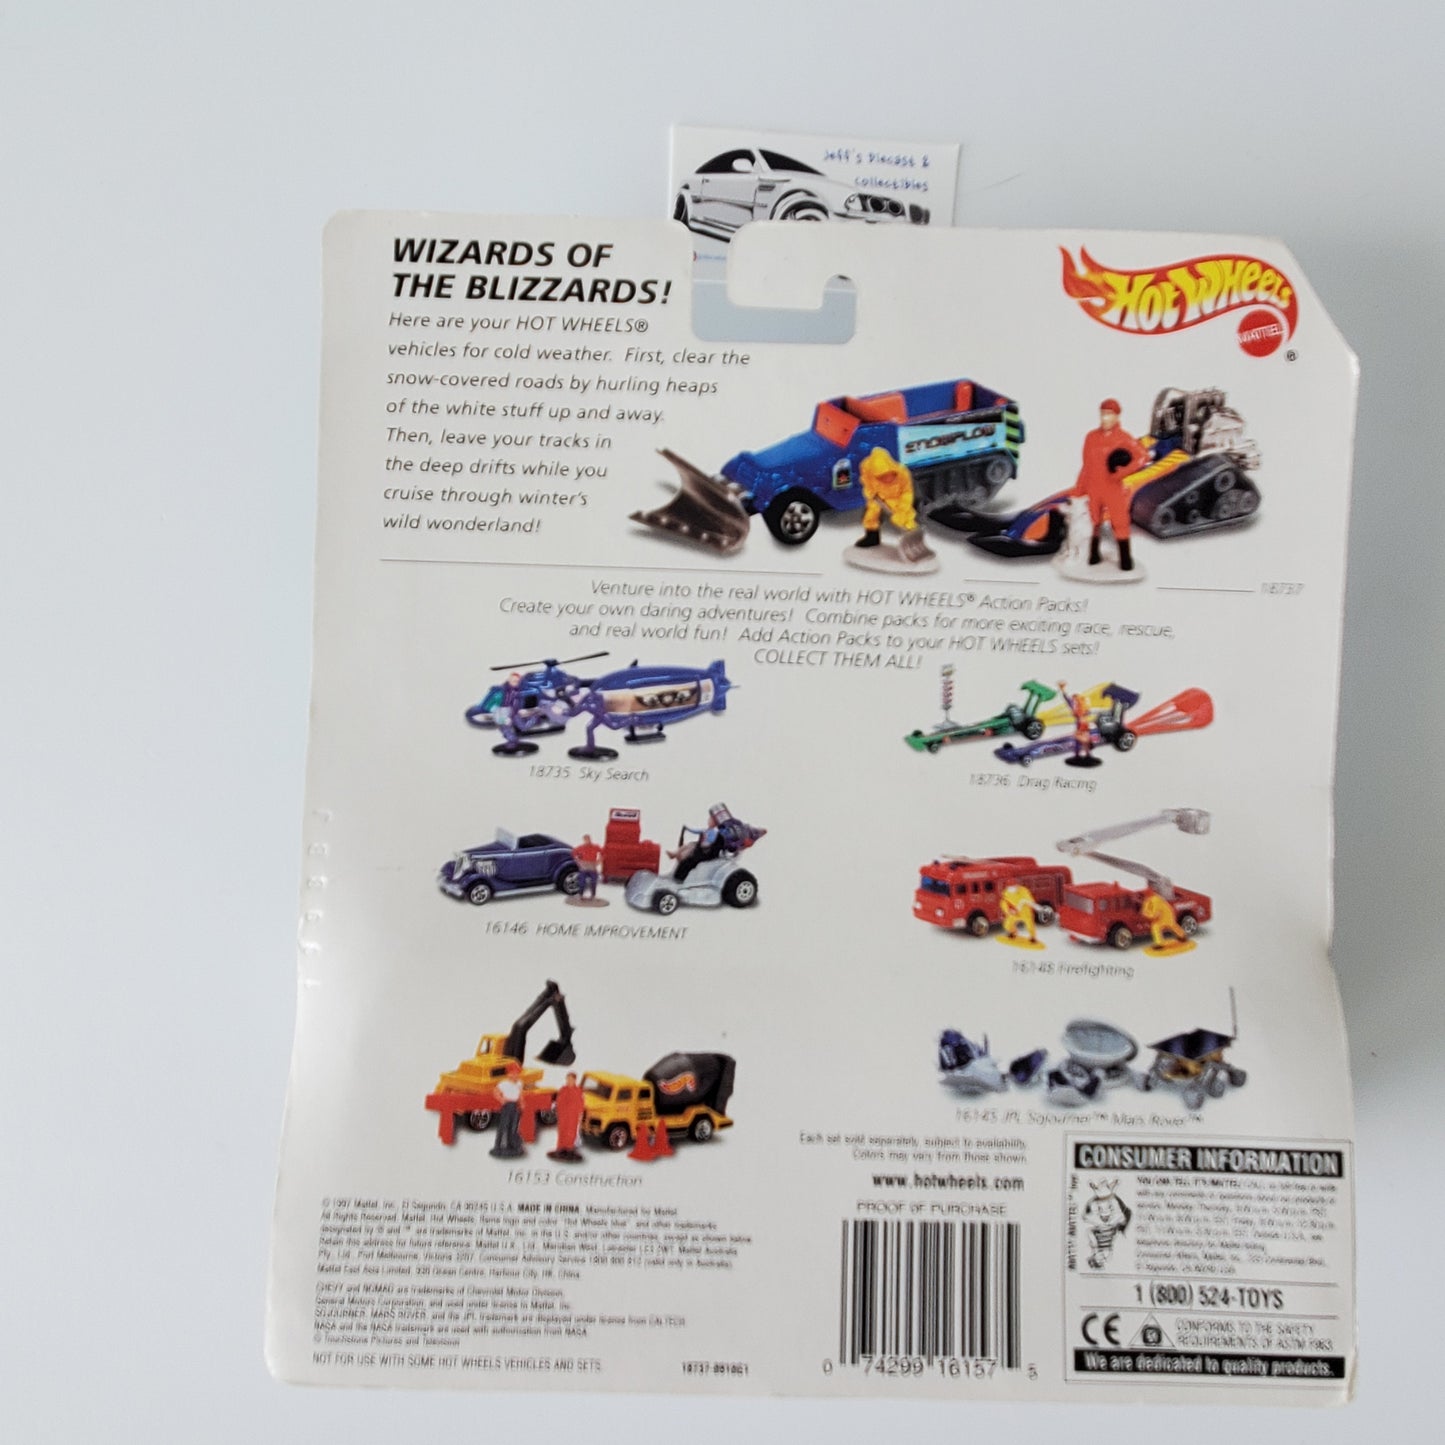 1997 Hot Wheels Action Pack Snow Plowers